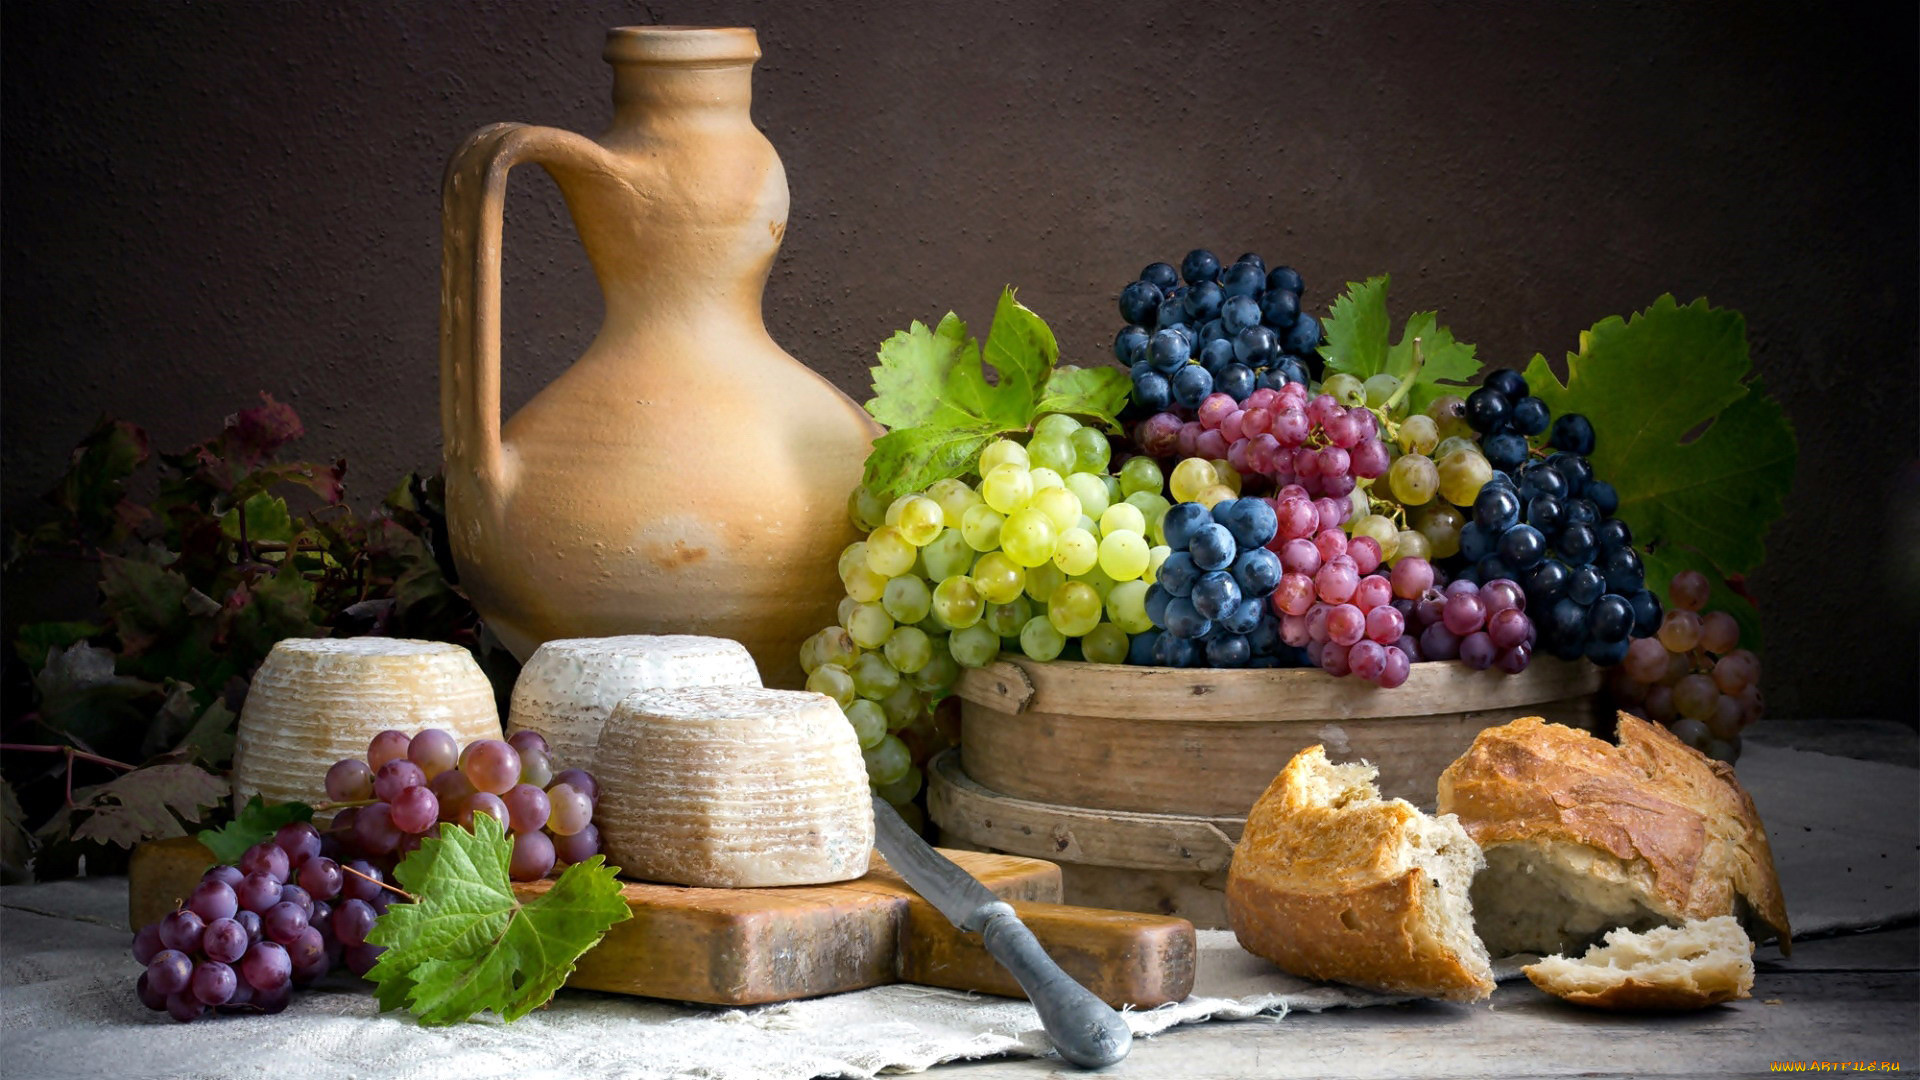 Still Life Food Cheese Fruit Berries Grapes Bread 1920x1080